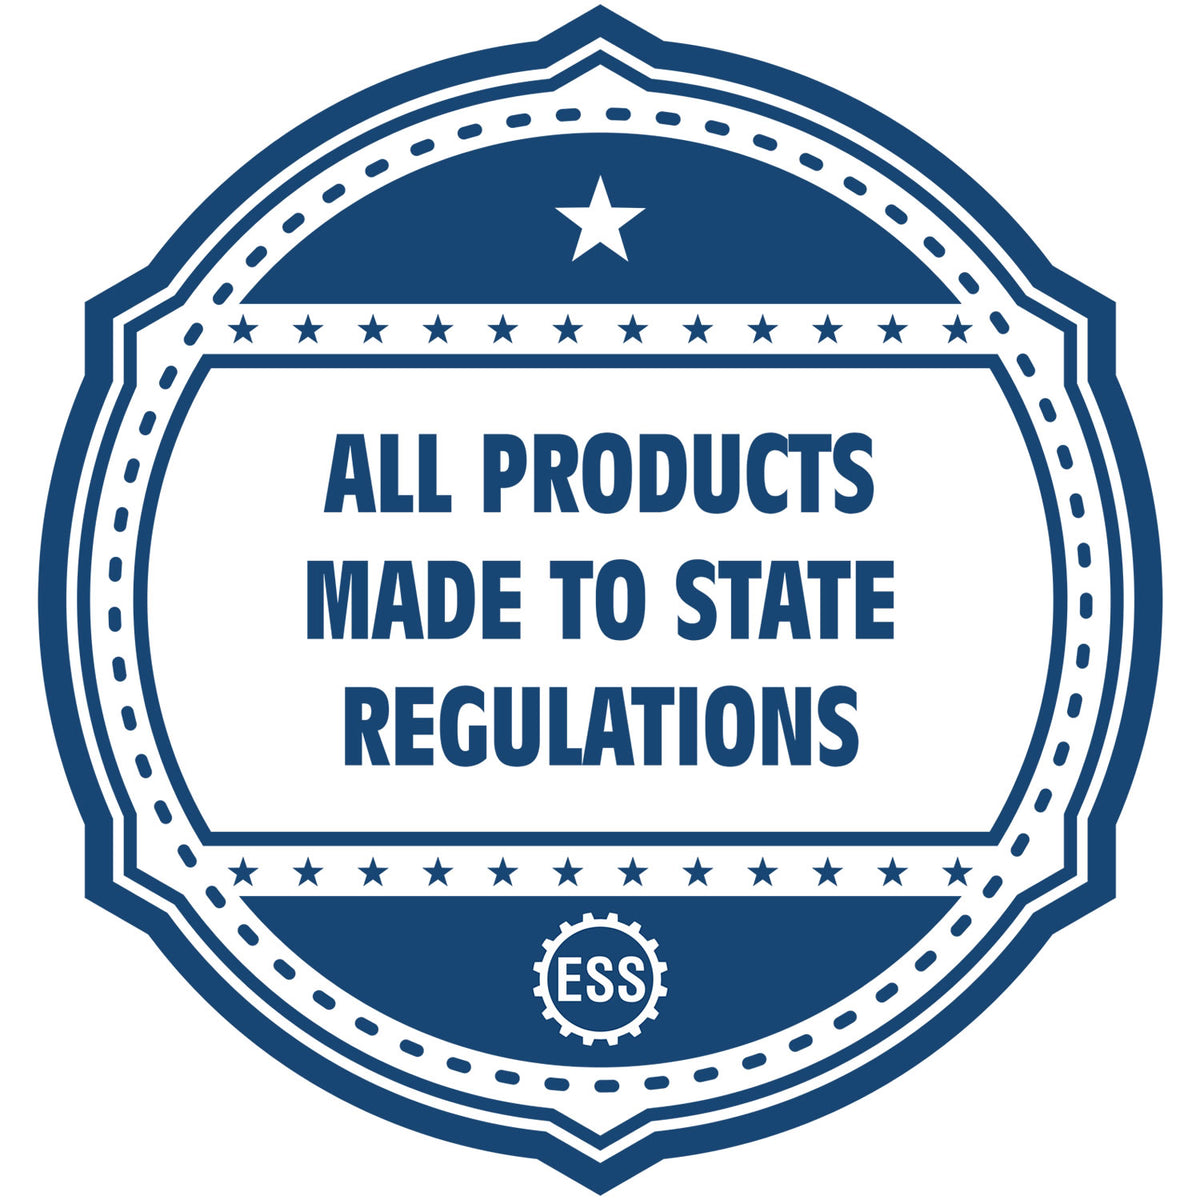 An icon or badge element for the State of Alabama Extended Long Reach Engineer Seal showing that this product is made in compliance with state regulations.